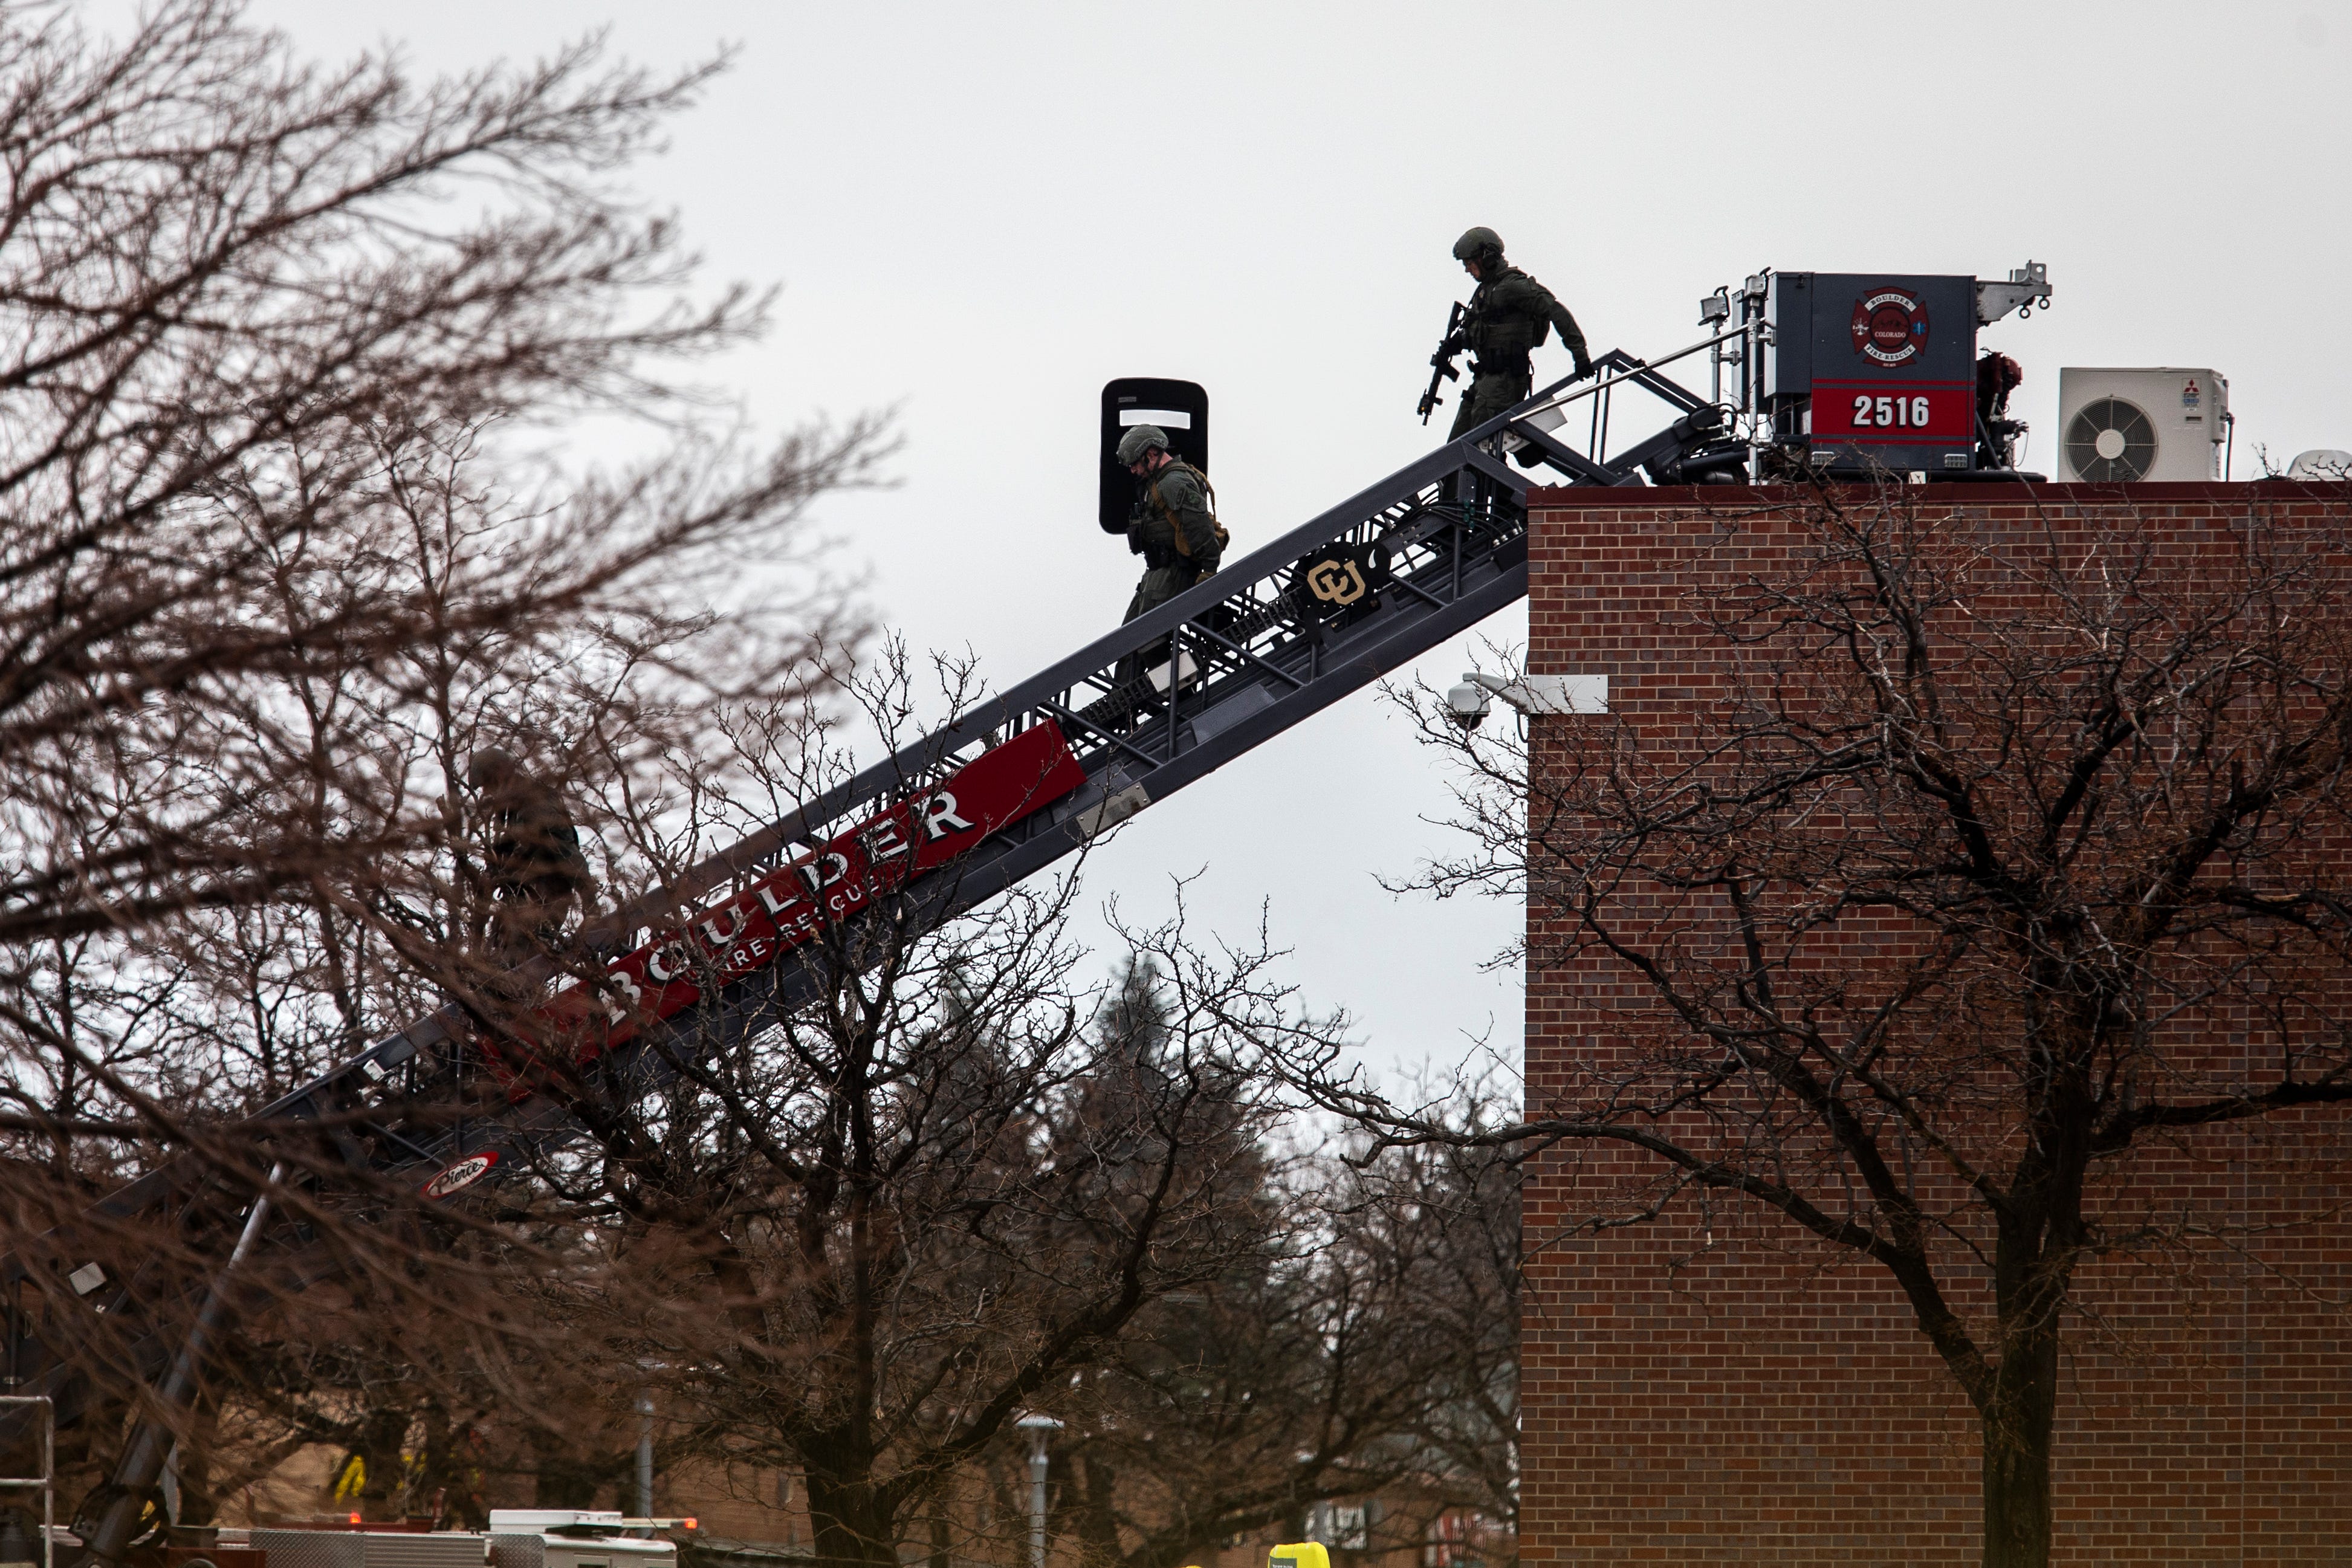 SWAT teams descend from the roof on a fire ladder after a gunman opened fire at a King Sooper's grocery store on March 22, 2021 in Boulder, Colo. Ten people, including a police officer, were killed in the attack.